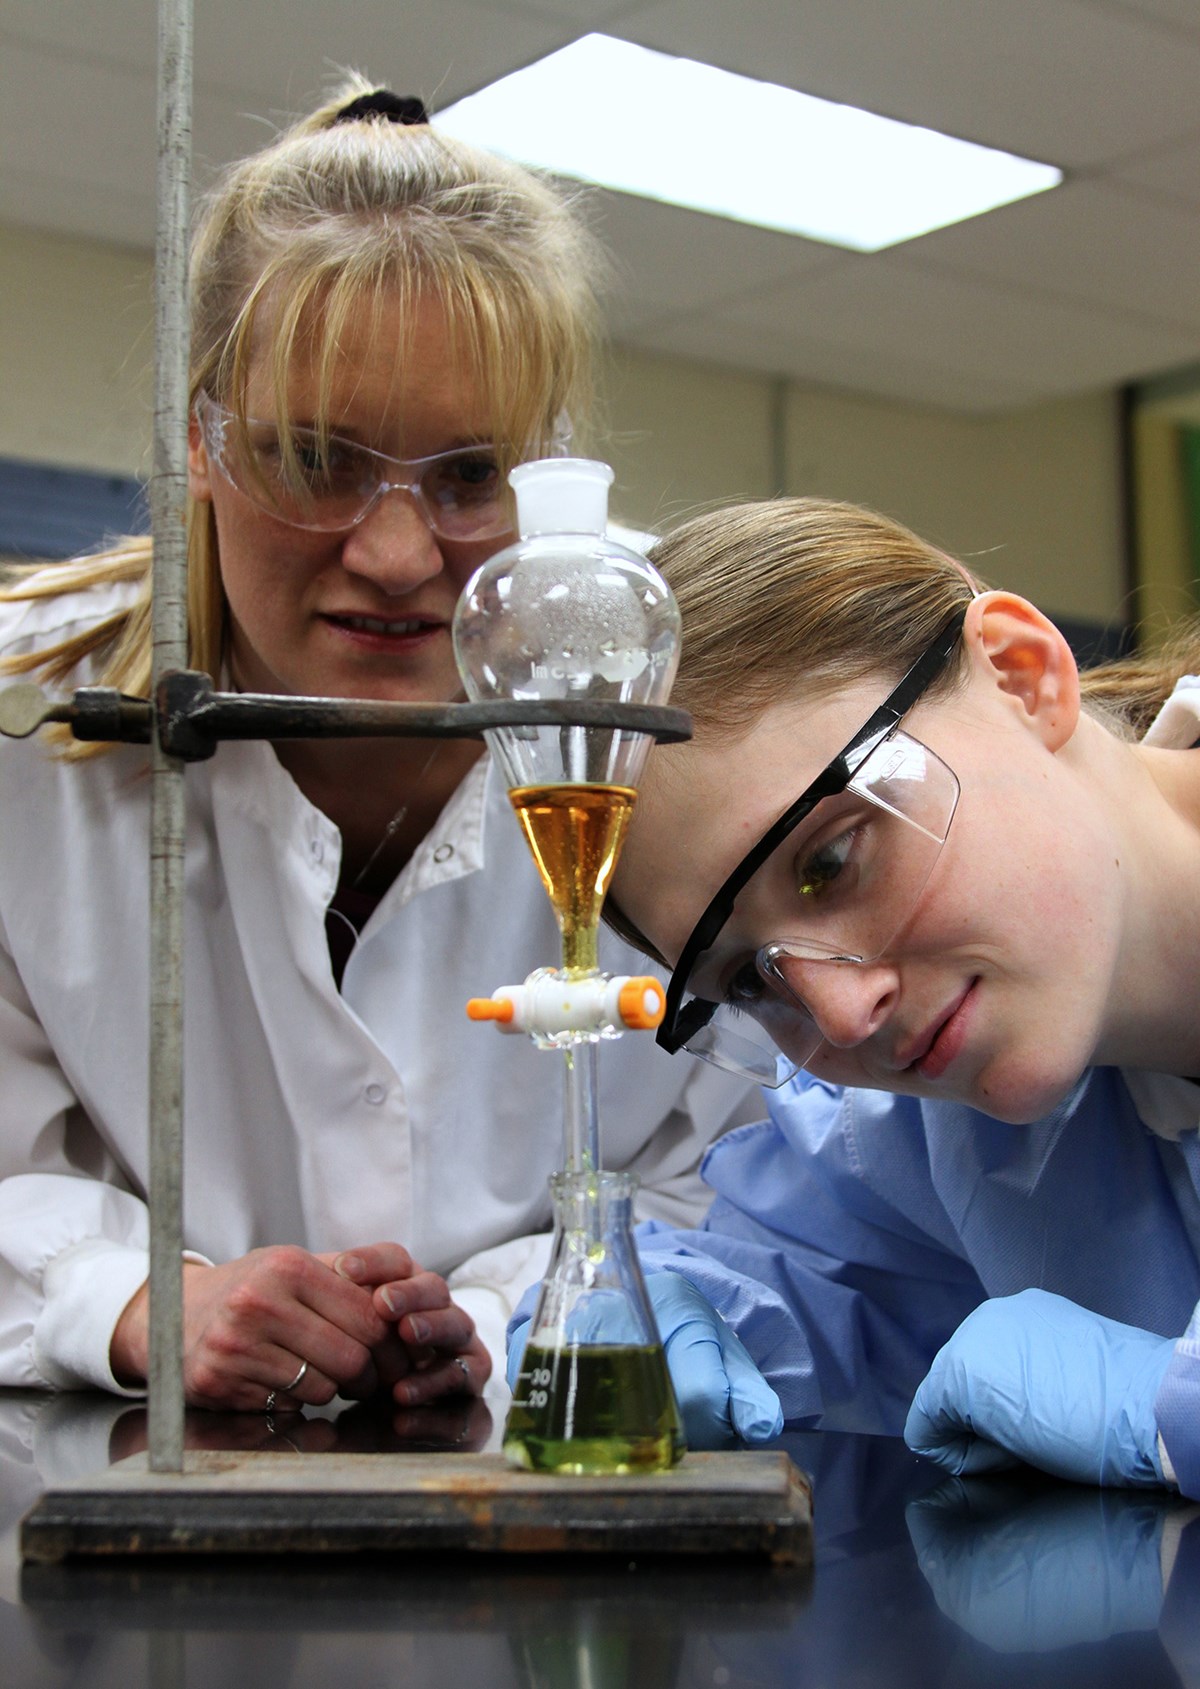 A Chemistry faculty member and student watch closely as a liquid is heated in a lab experiment.